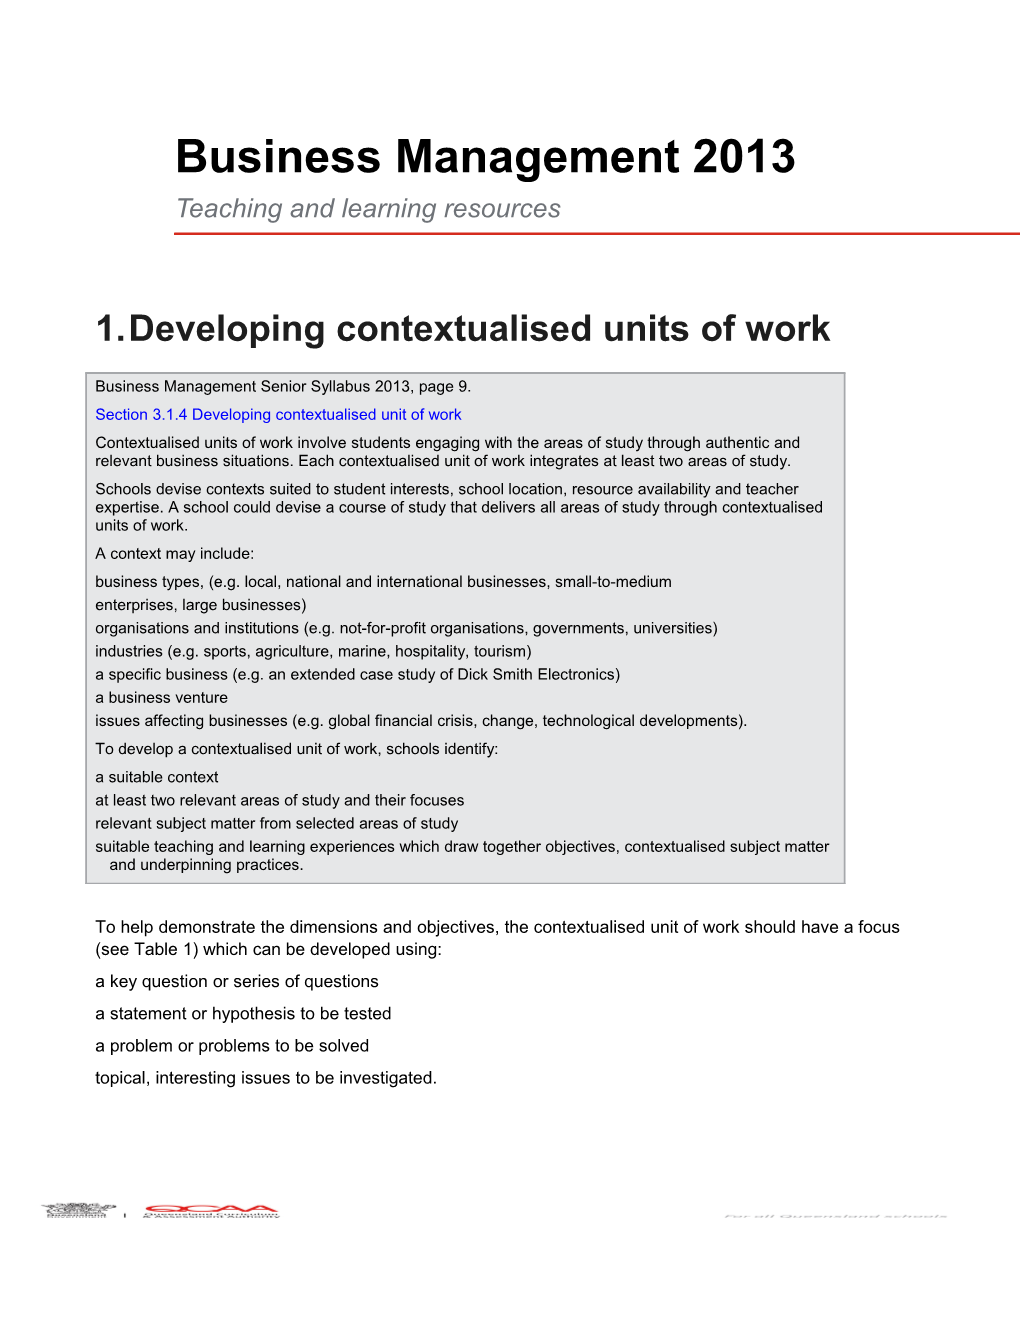 Business Management (2013) Teaching and Learning Resources: Developing Contextualised Units